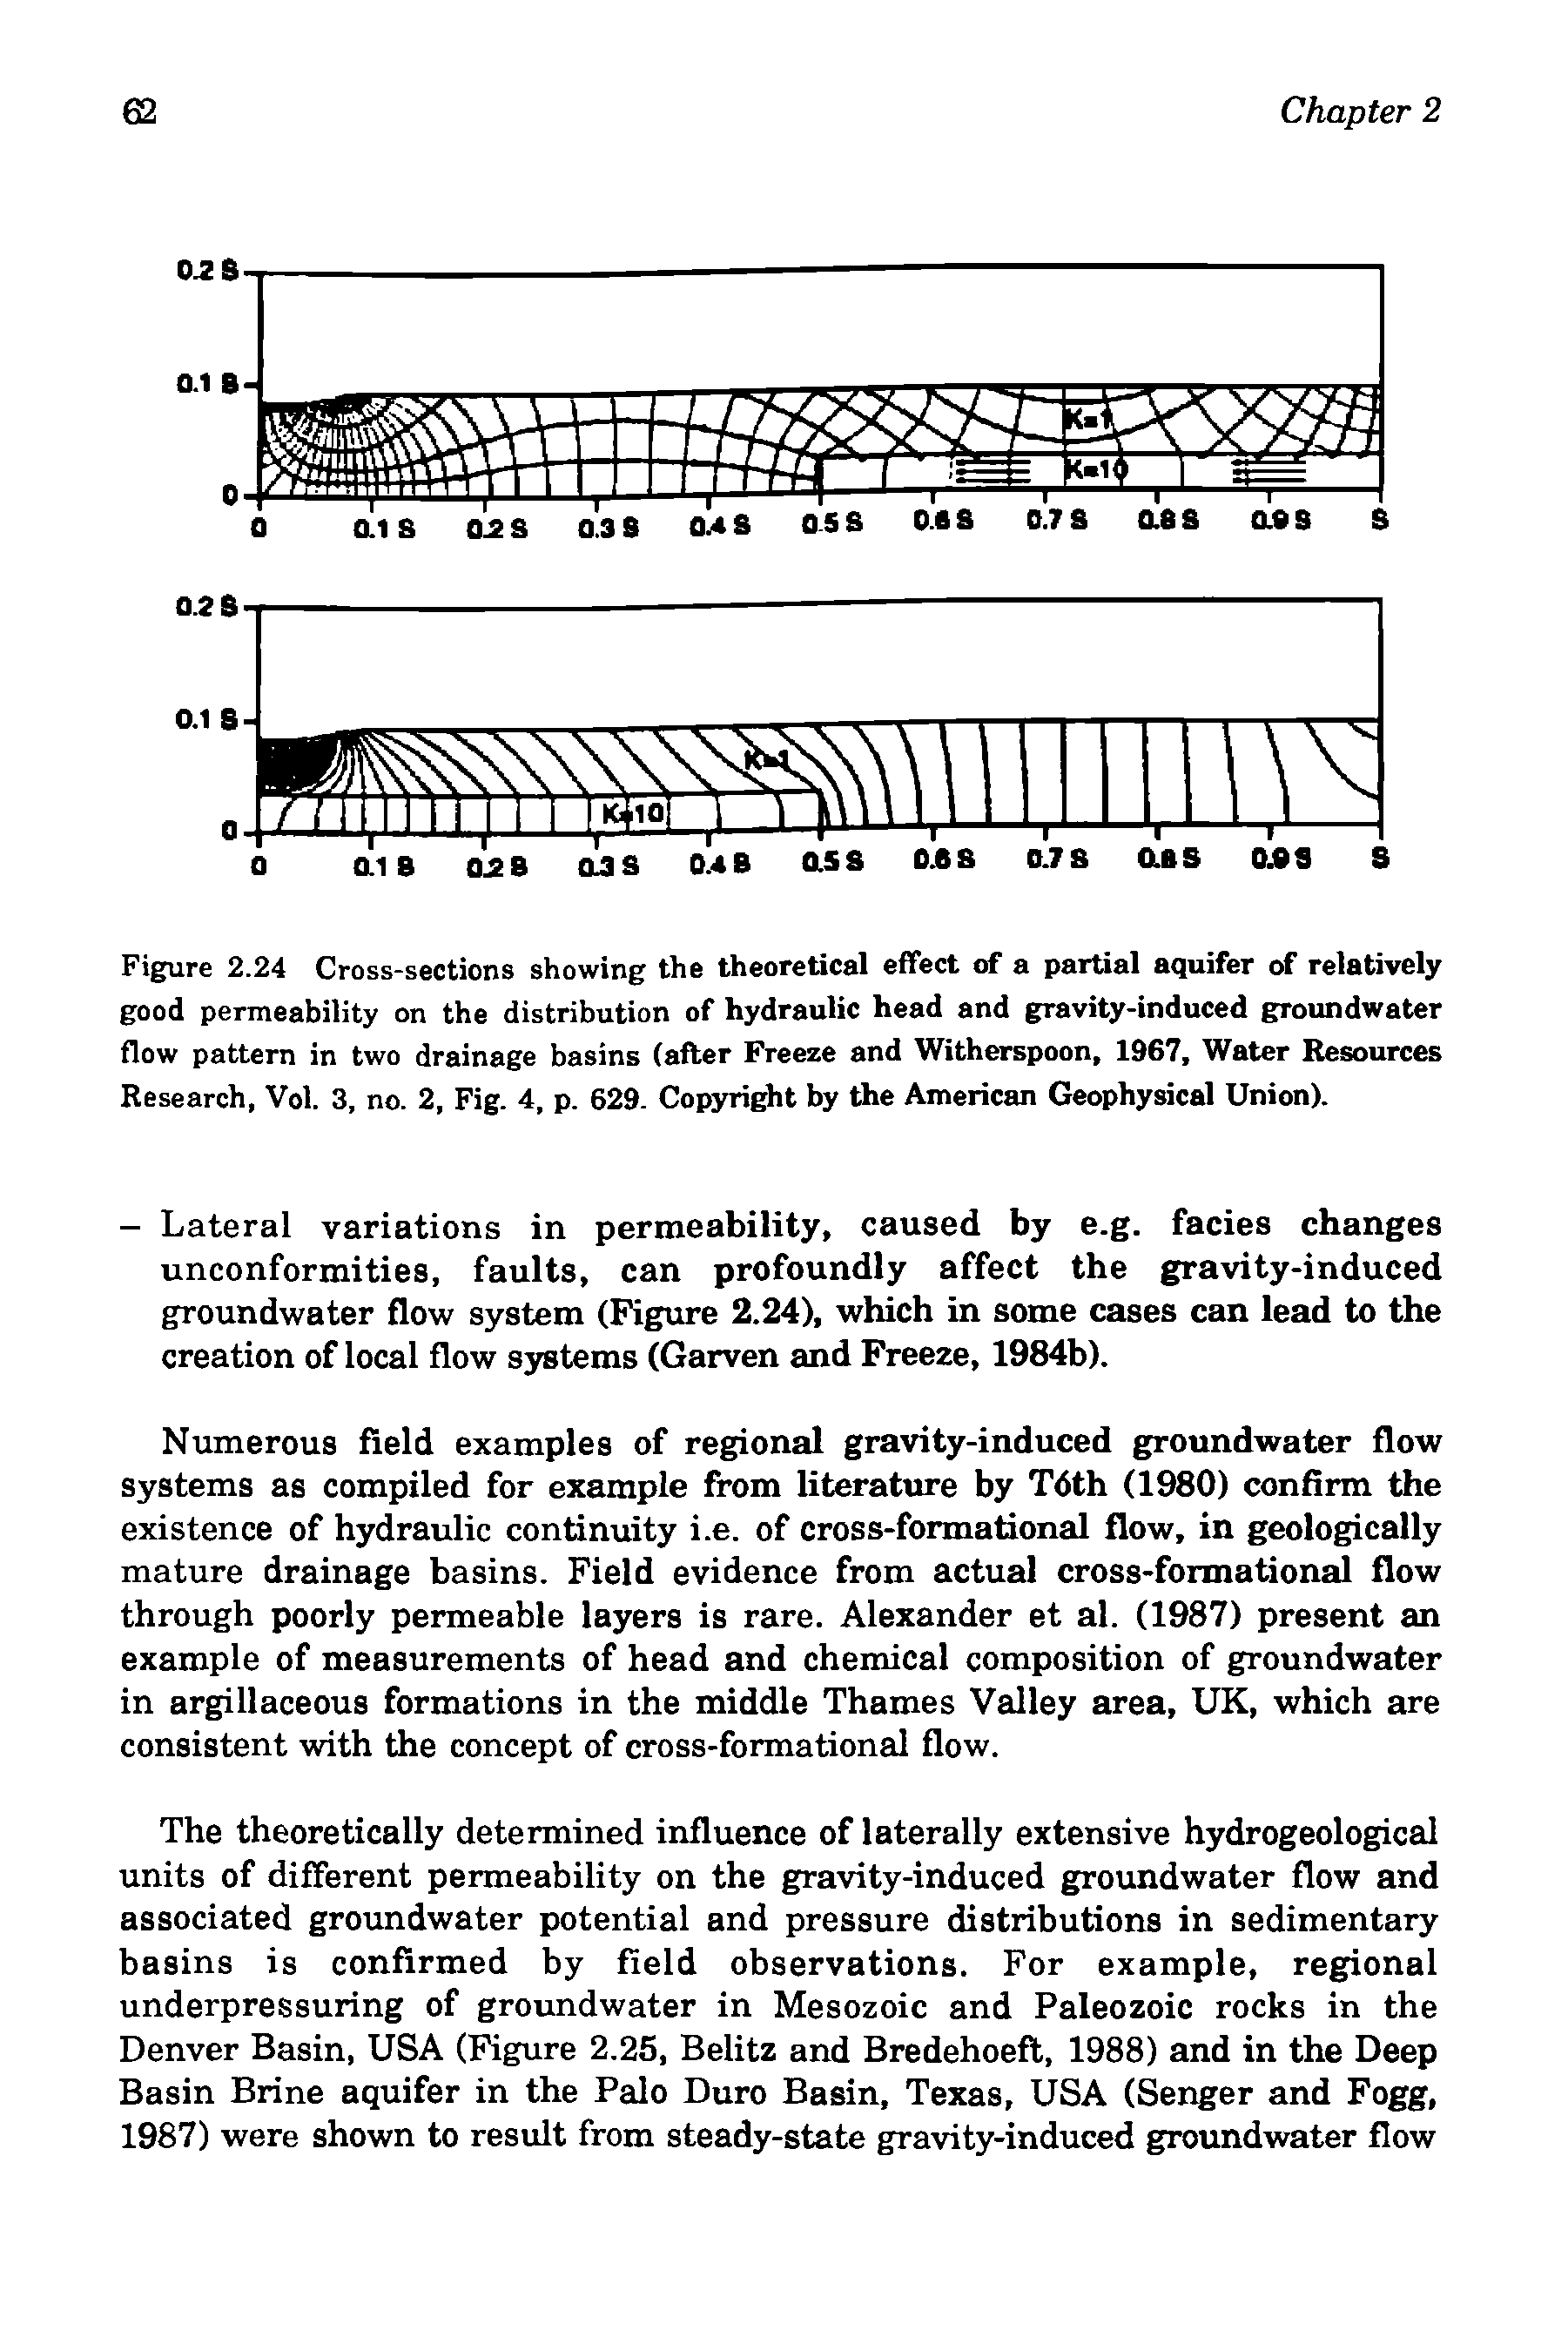 Figure 2.24 Cross-sections showing the theoretical effect of a partial aquifer of relatively good permeability on the distribution of hydraulic head and gravity-induced groundwater flow pattern in two drainage basins (after Freeze and Witherspoon, 1967, Water Resources Research, Vol. 3, no. 2, Fig. 4, p. 629. Copyright by the American Geophysical Union).